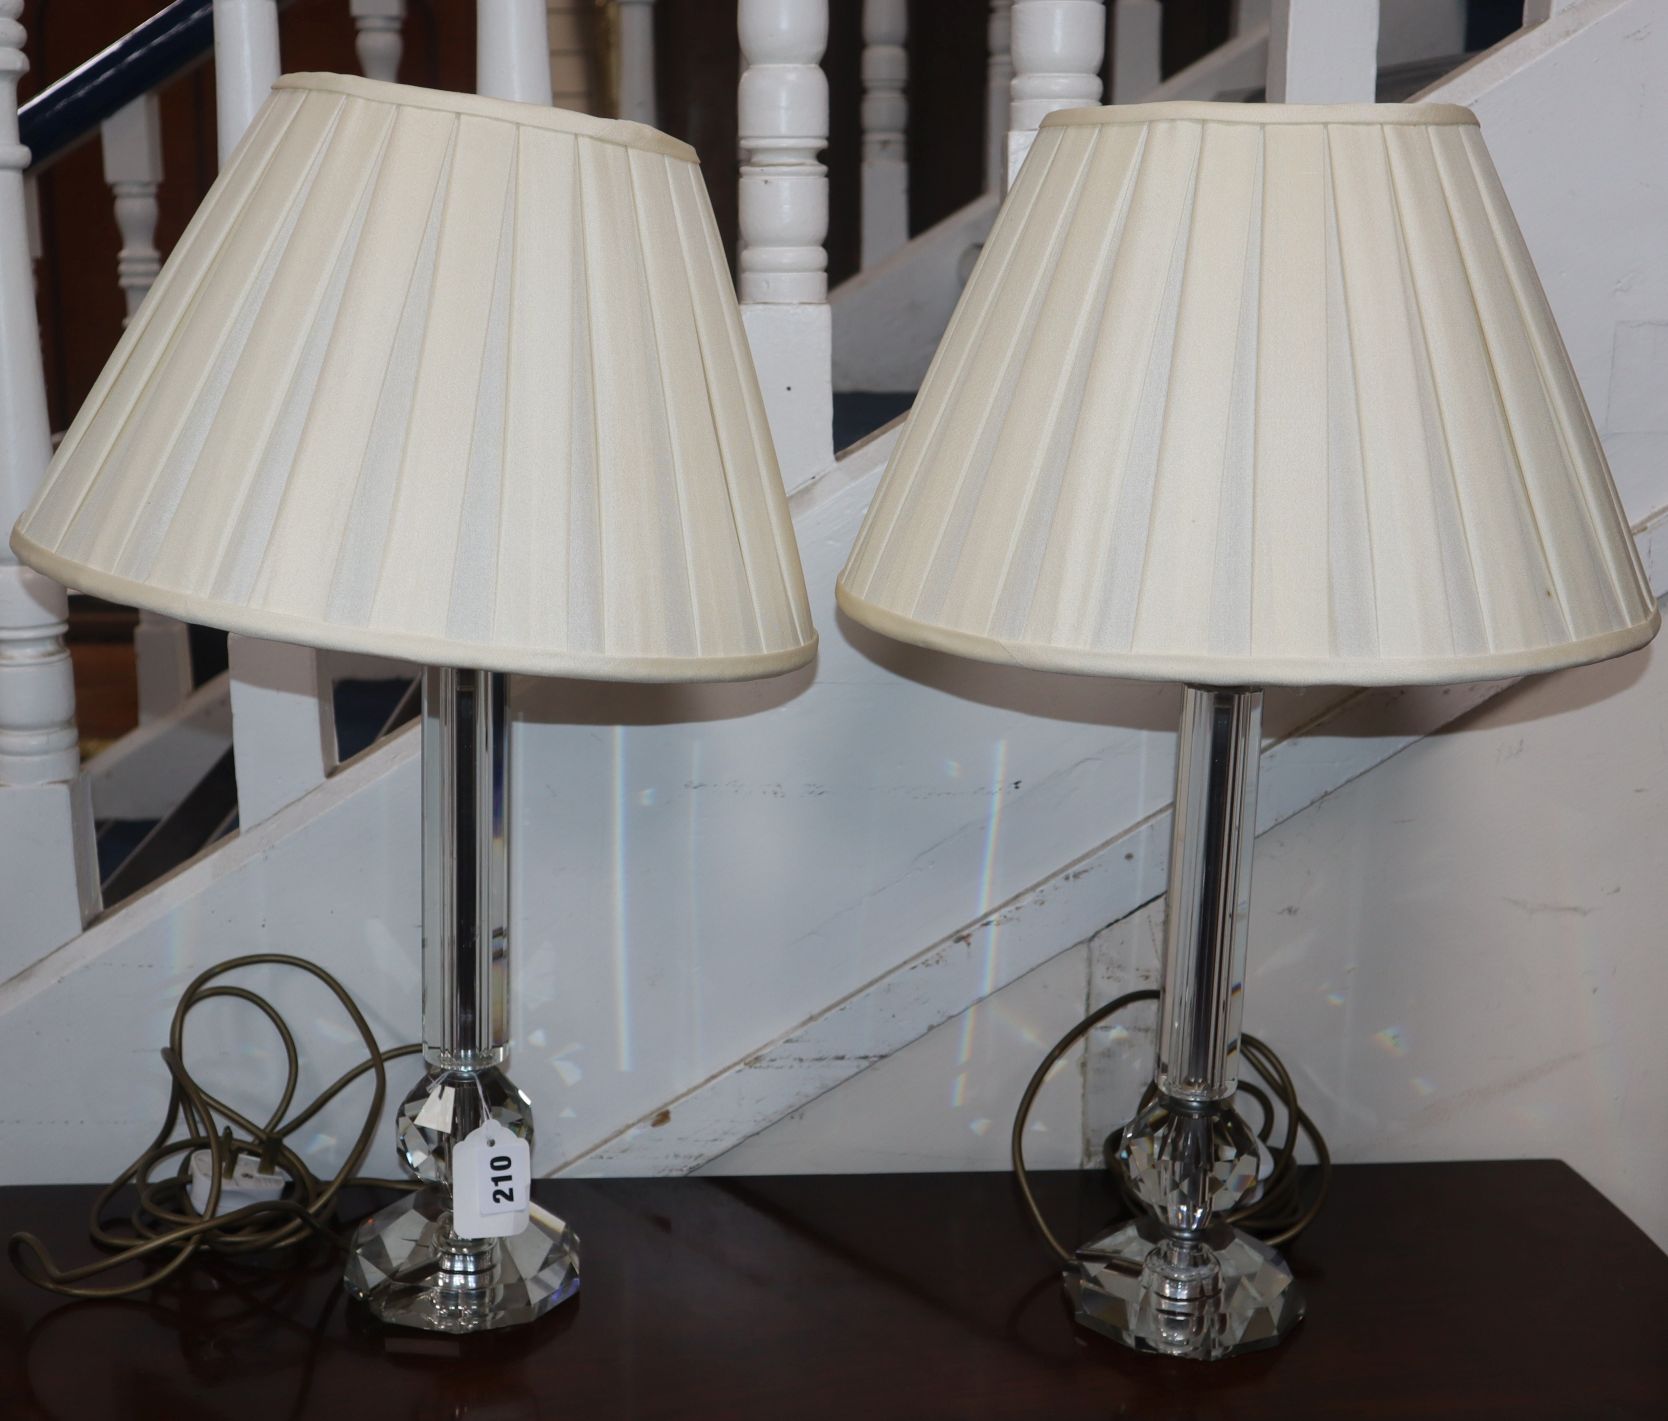 A pair of Art Deco glass table lamps